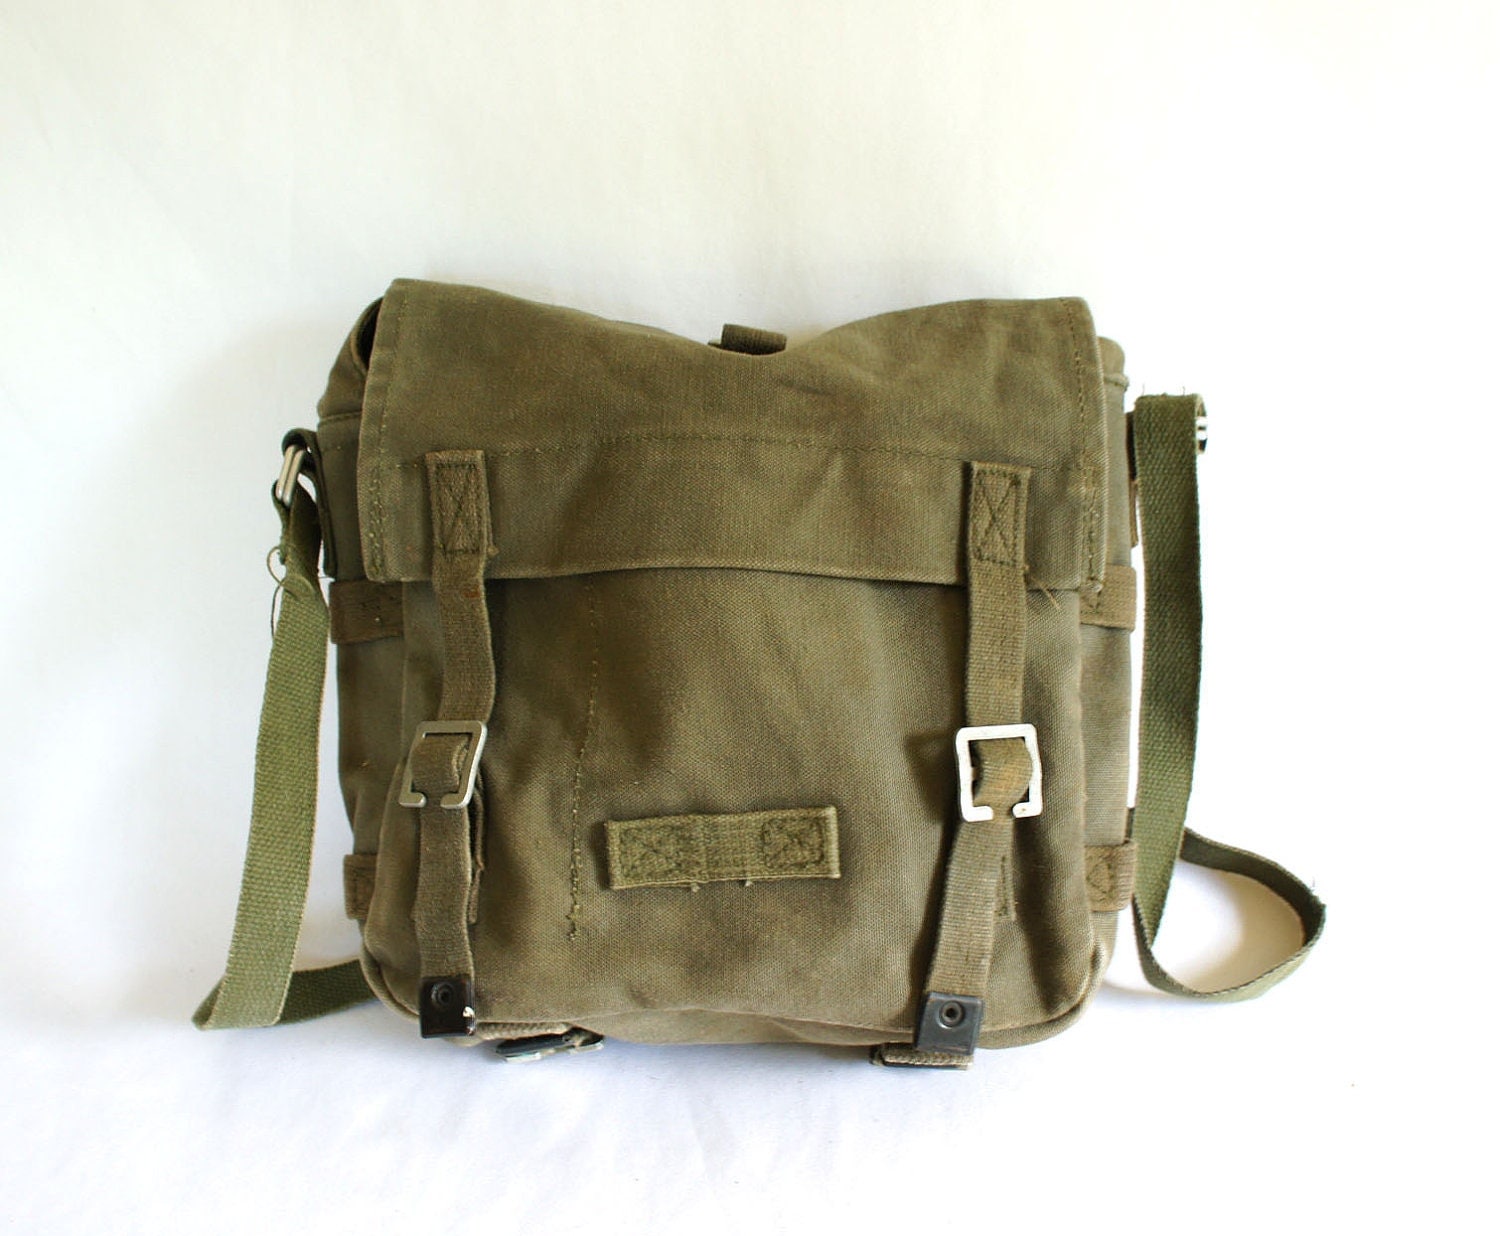 Vintage Military style Canvas Shoulder Bag in an Army Green